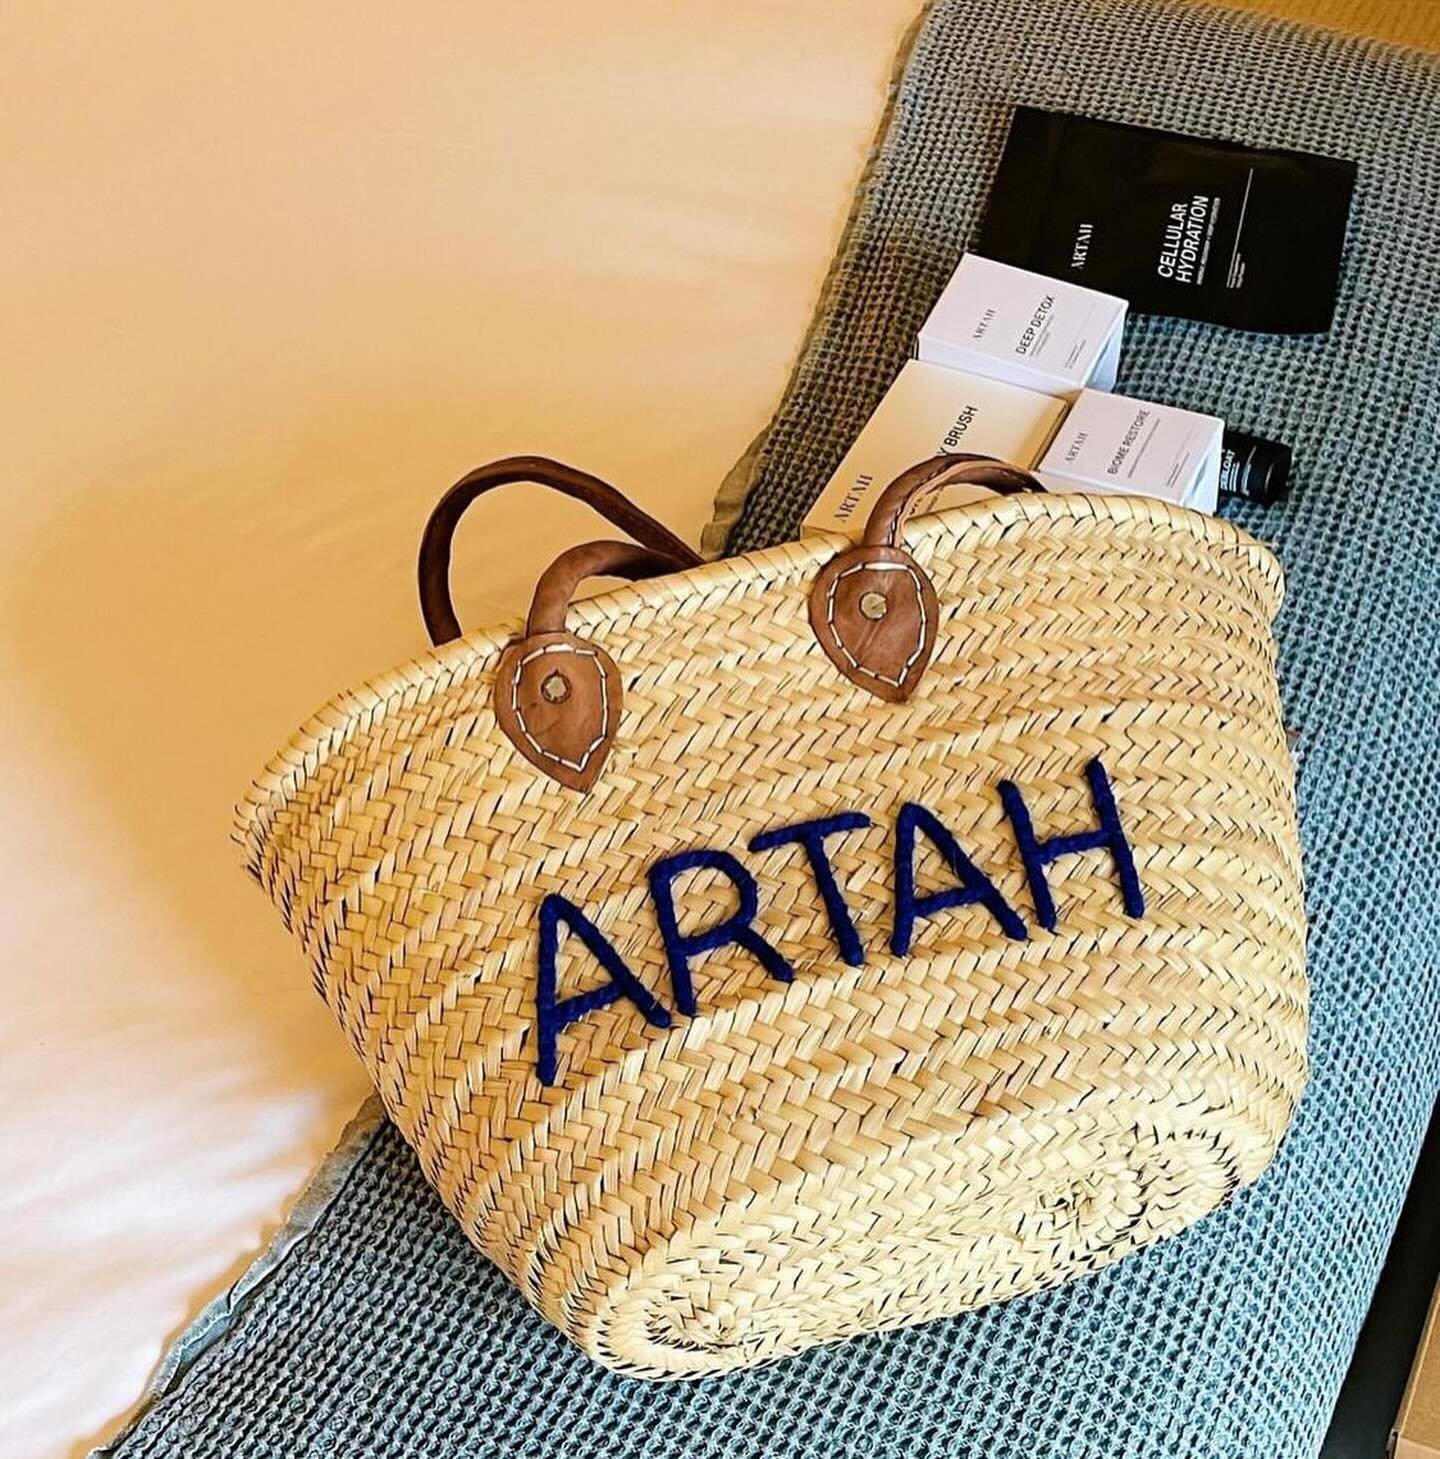 Last week we hosted an intimate group of press at the @artahhealth retreat in the Pyrenees to celebrate longevity and the brand&rsquo;s latest supplement launch, Enhanced NAD+ ⛰️🧘🏼&zwj;♀️🥑

Adopting the ARTAH way of life to the fullest, the group 